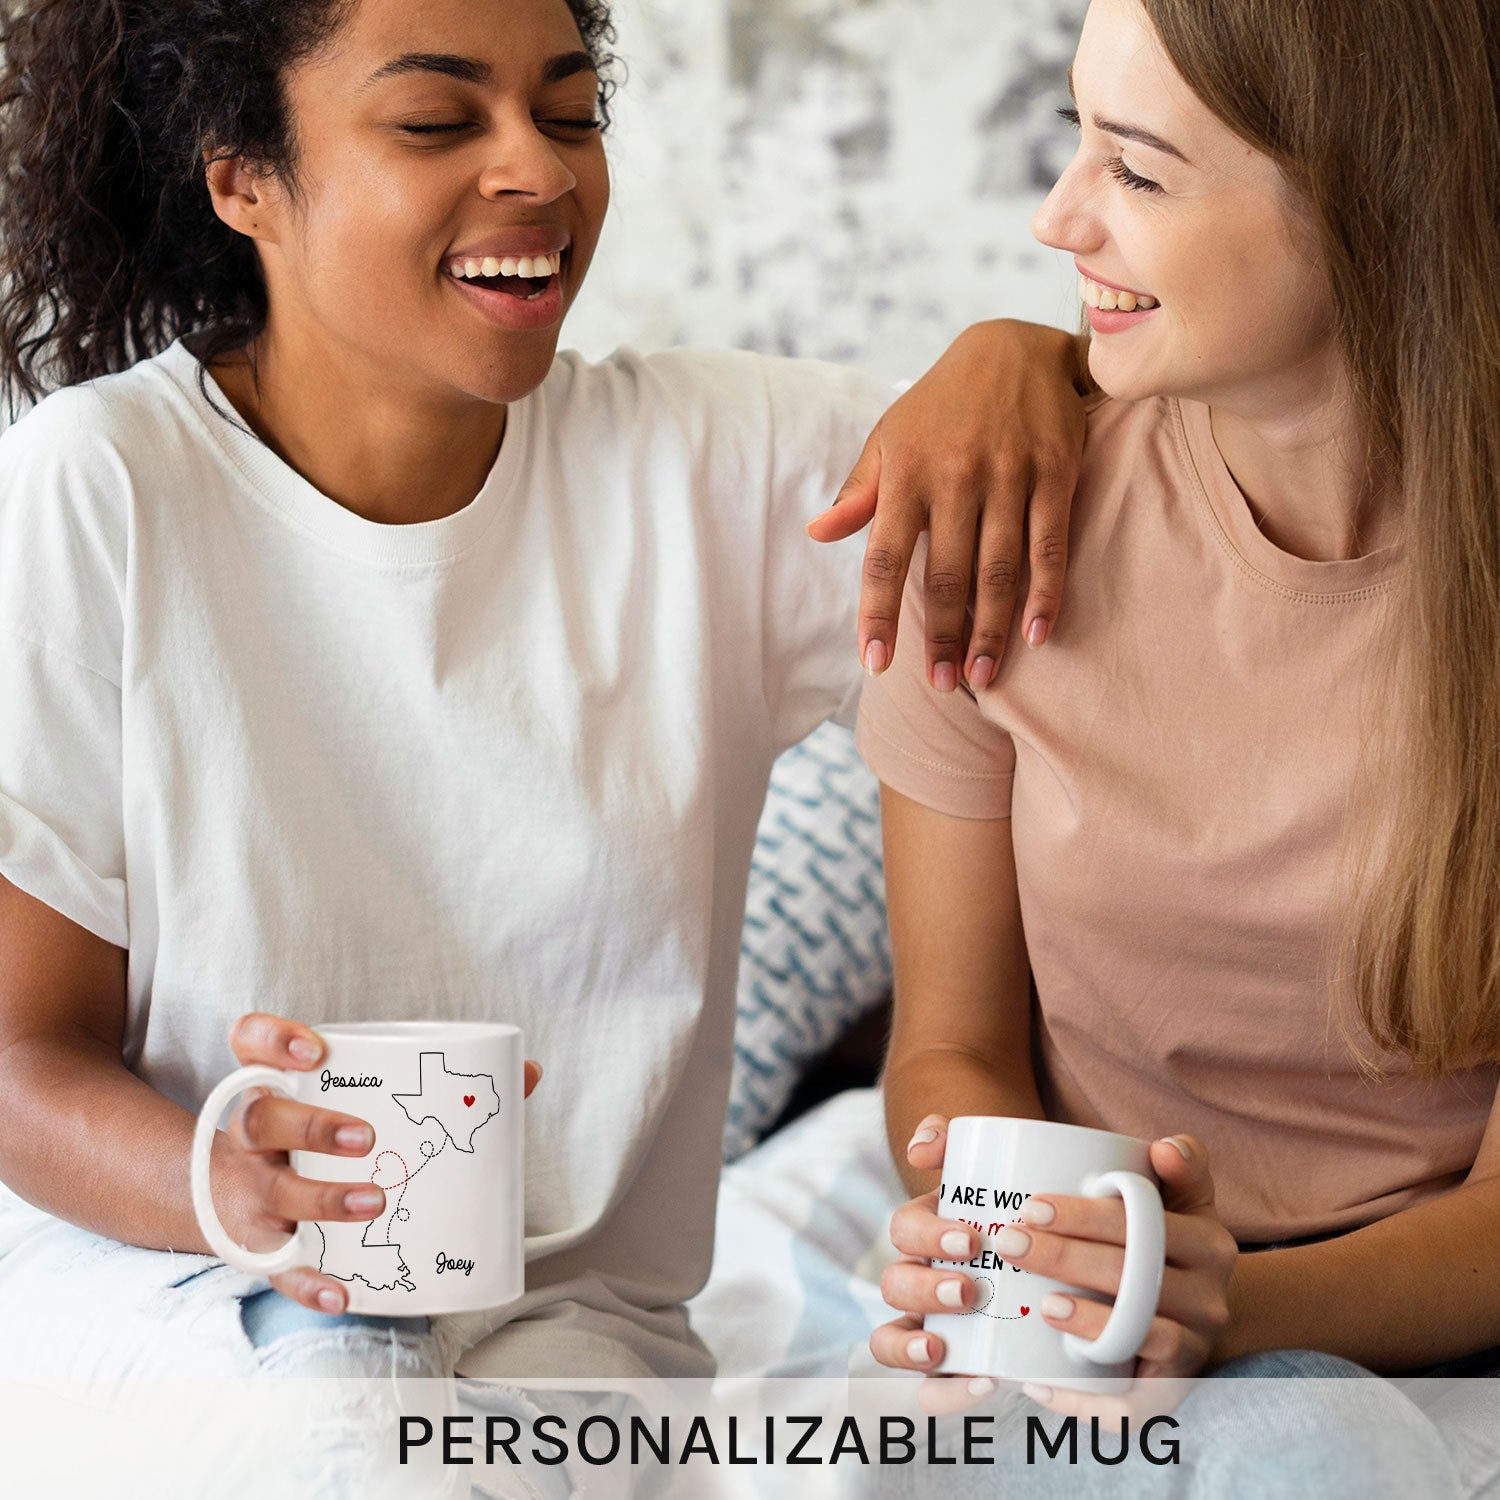 You Are Worth Every Mile - Personalized Anniversary or Valentine's Day gift for Husband or Wife - Custom Mug - MyMindfulGifts